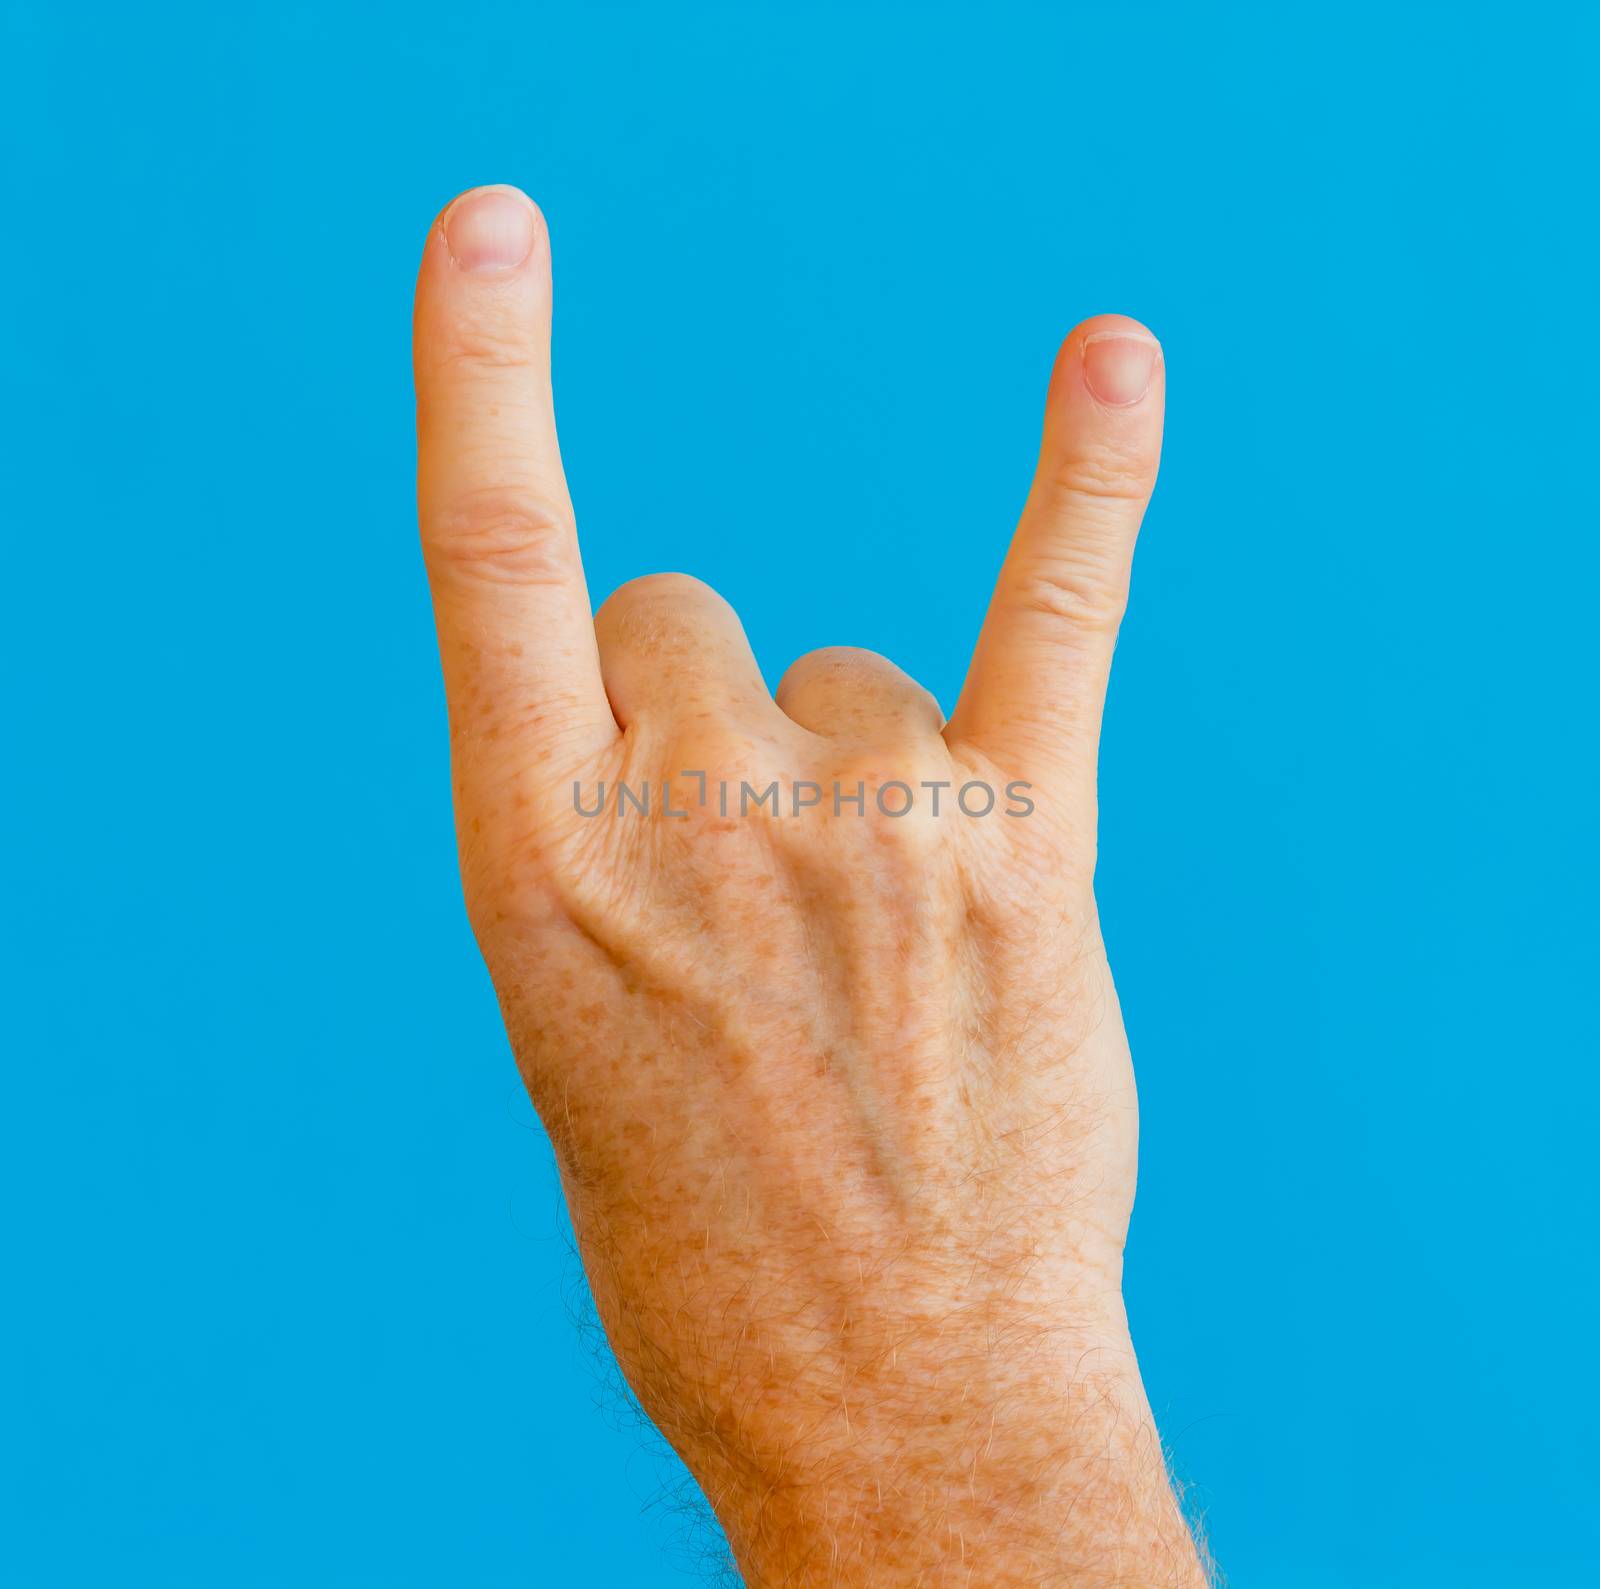 one hand makes the gesture of the horns which has the meaning approval, good luck and complicity  in central and northern Europe, or vulgar and offensive in Mediterranean Europe.